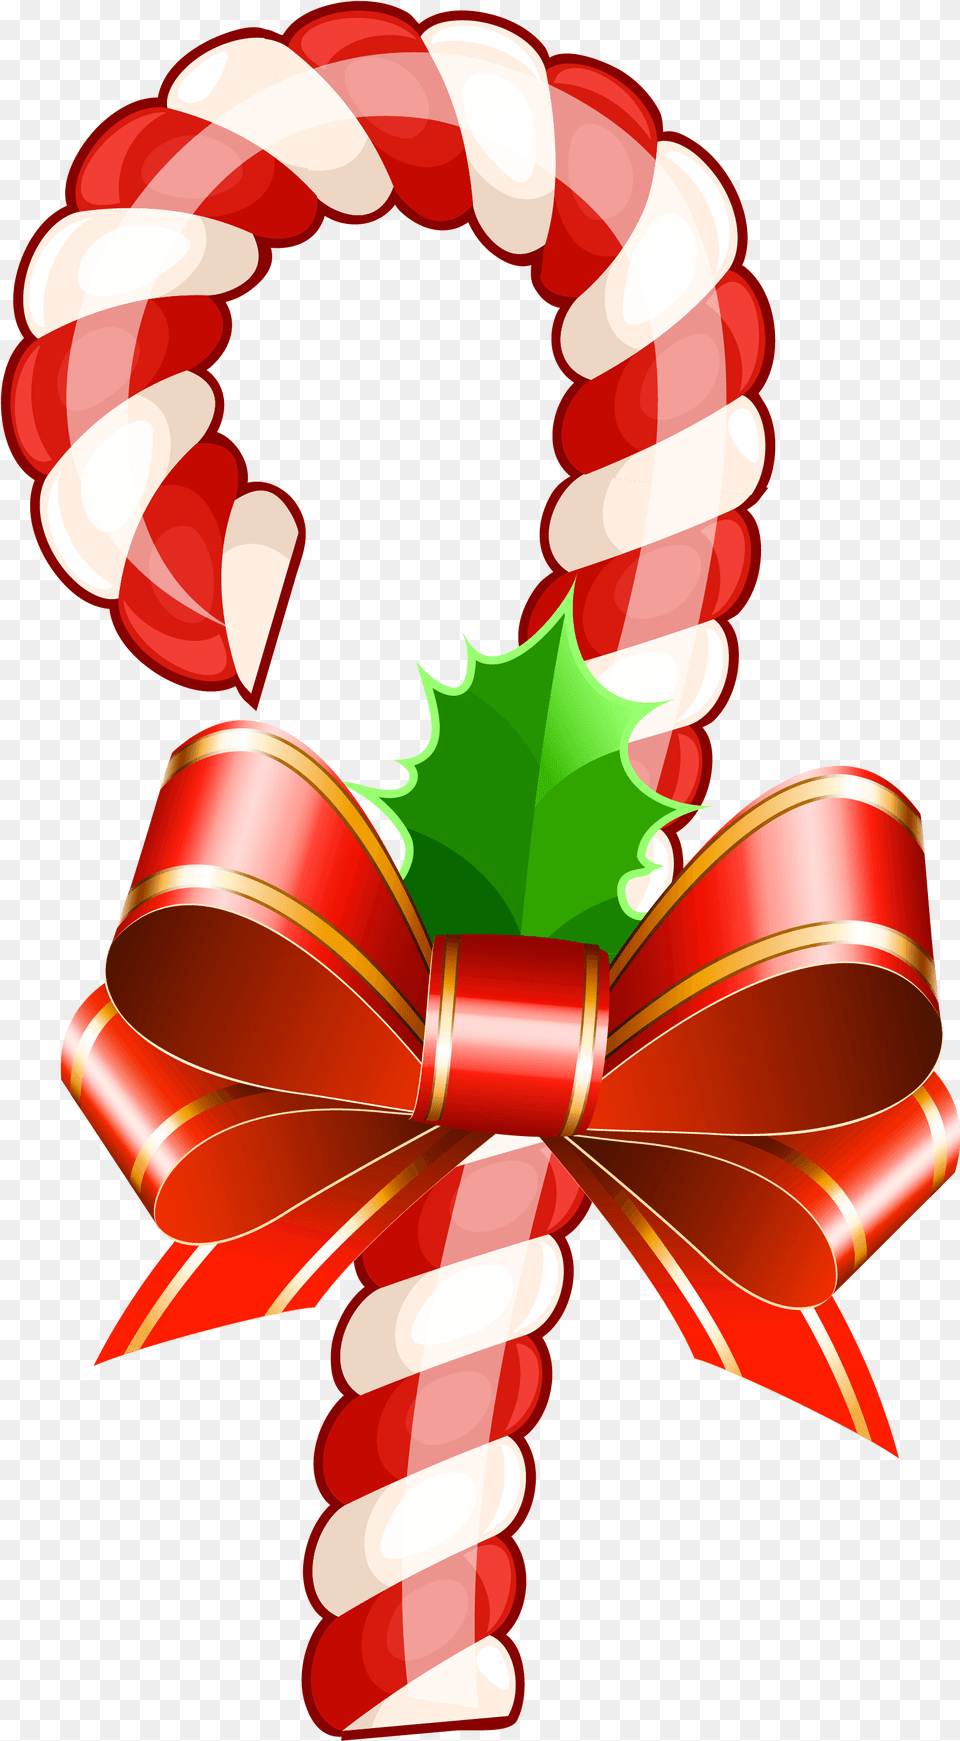 Xmas Stuff For Christmas Candy Adornos Dibujos, Food, Sweets, Dynamite, Weapon Png